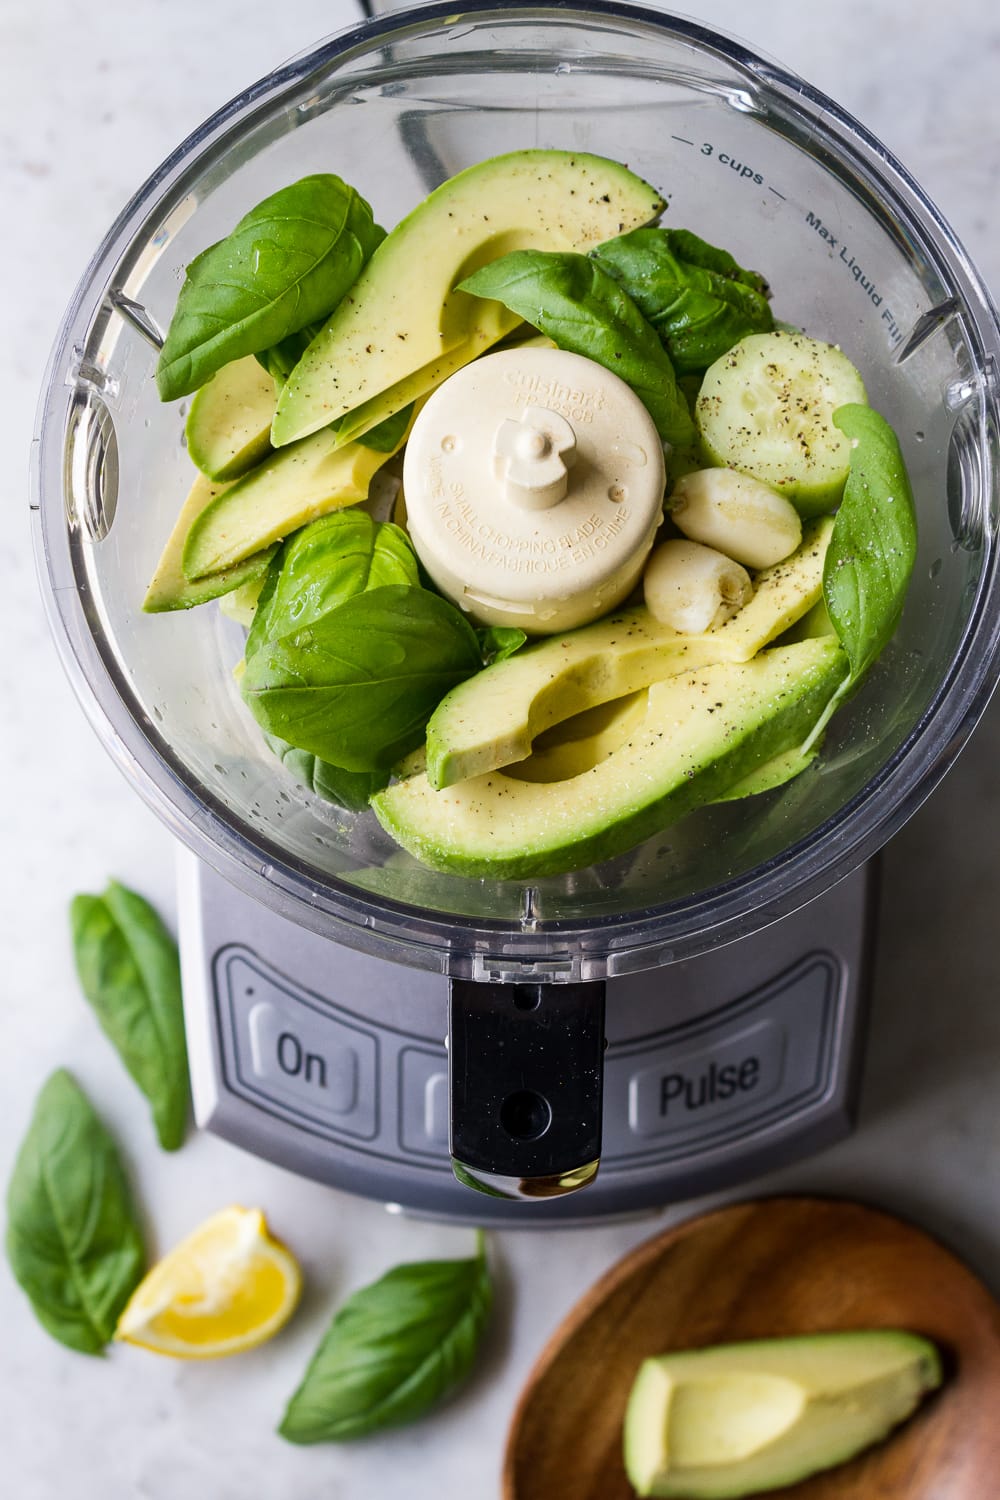 top down view of food processor with sliced avocado, cucumbers, basil leaves, salt, garlic, pepper and lemon juice before putting the lid on to process into a creamy sauce